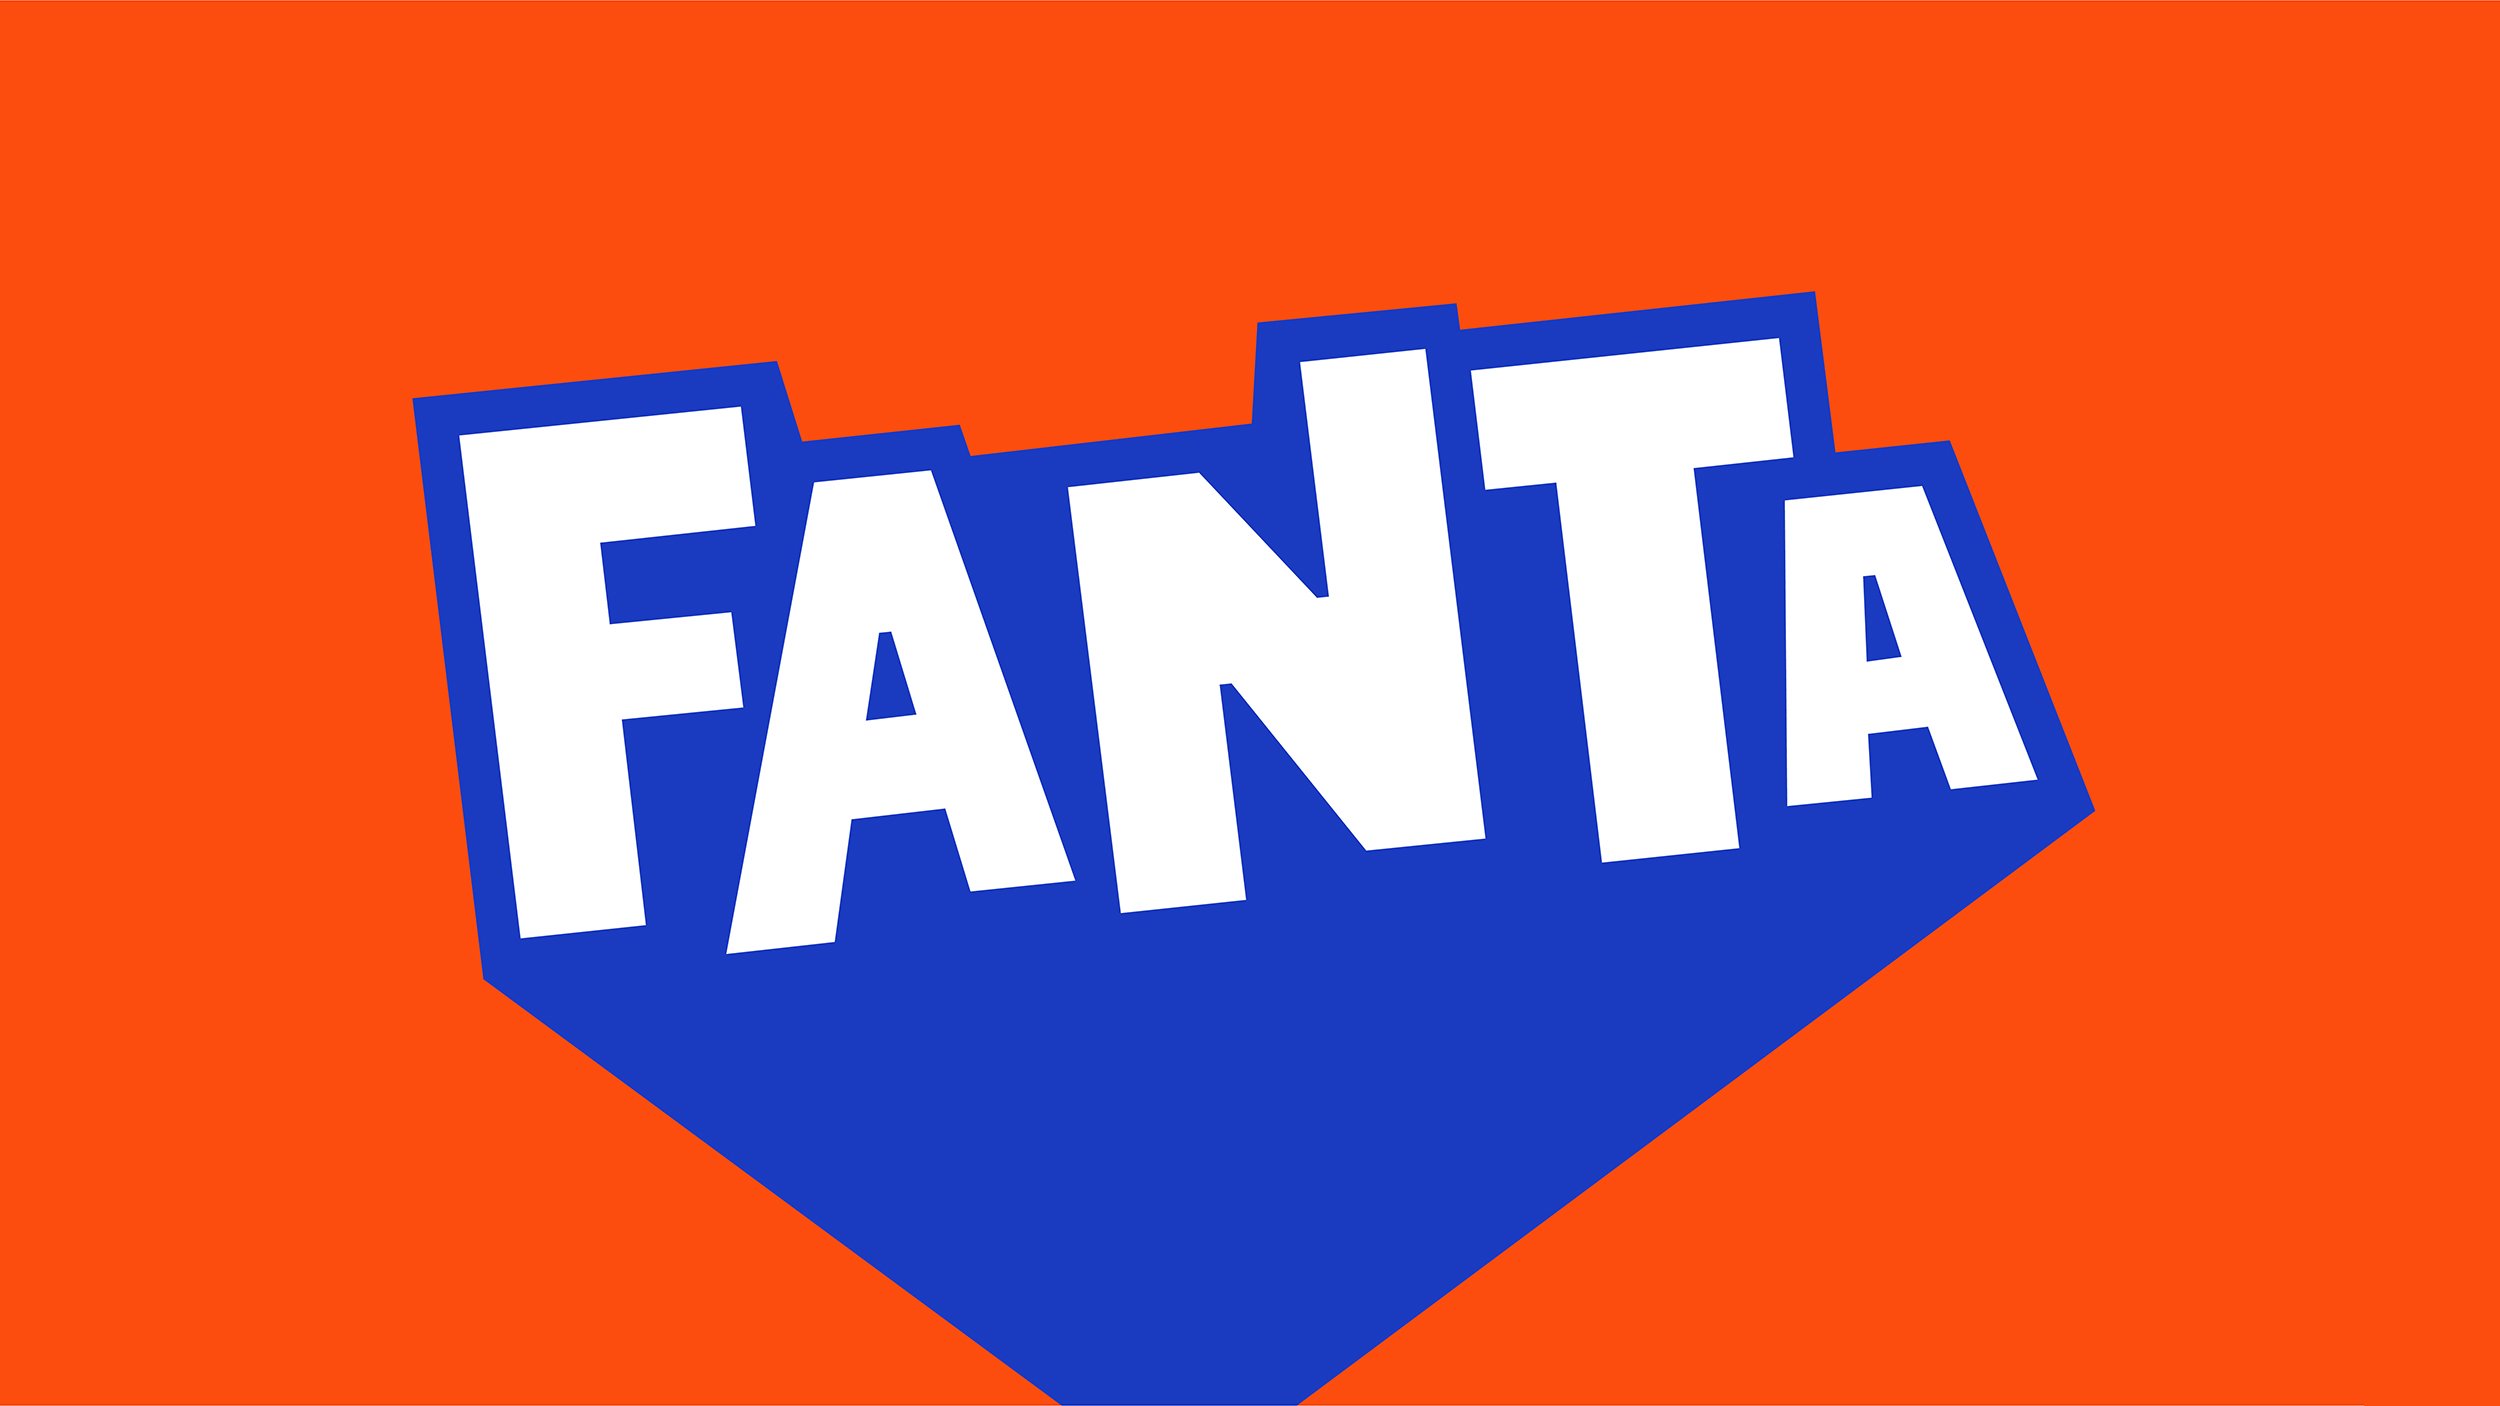 Fanta rebrands with truly playful universal identity